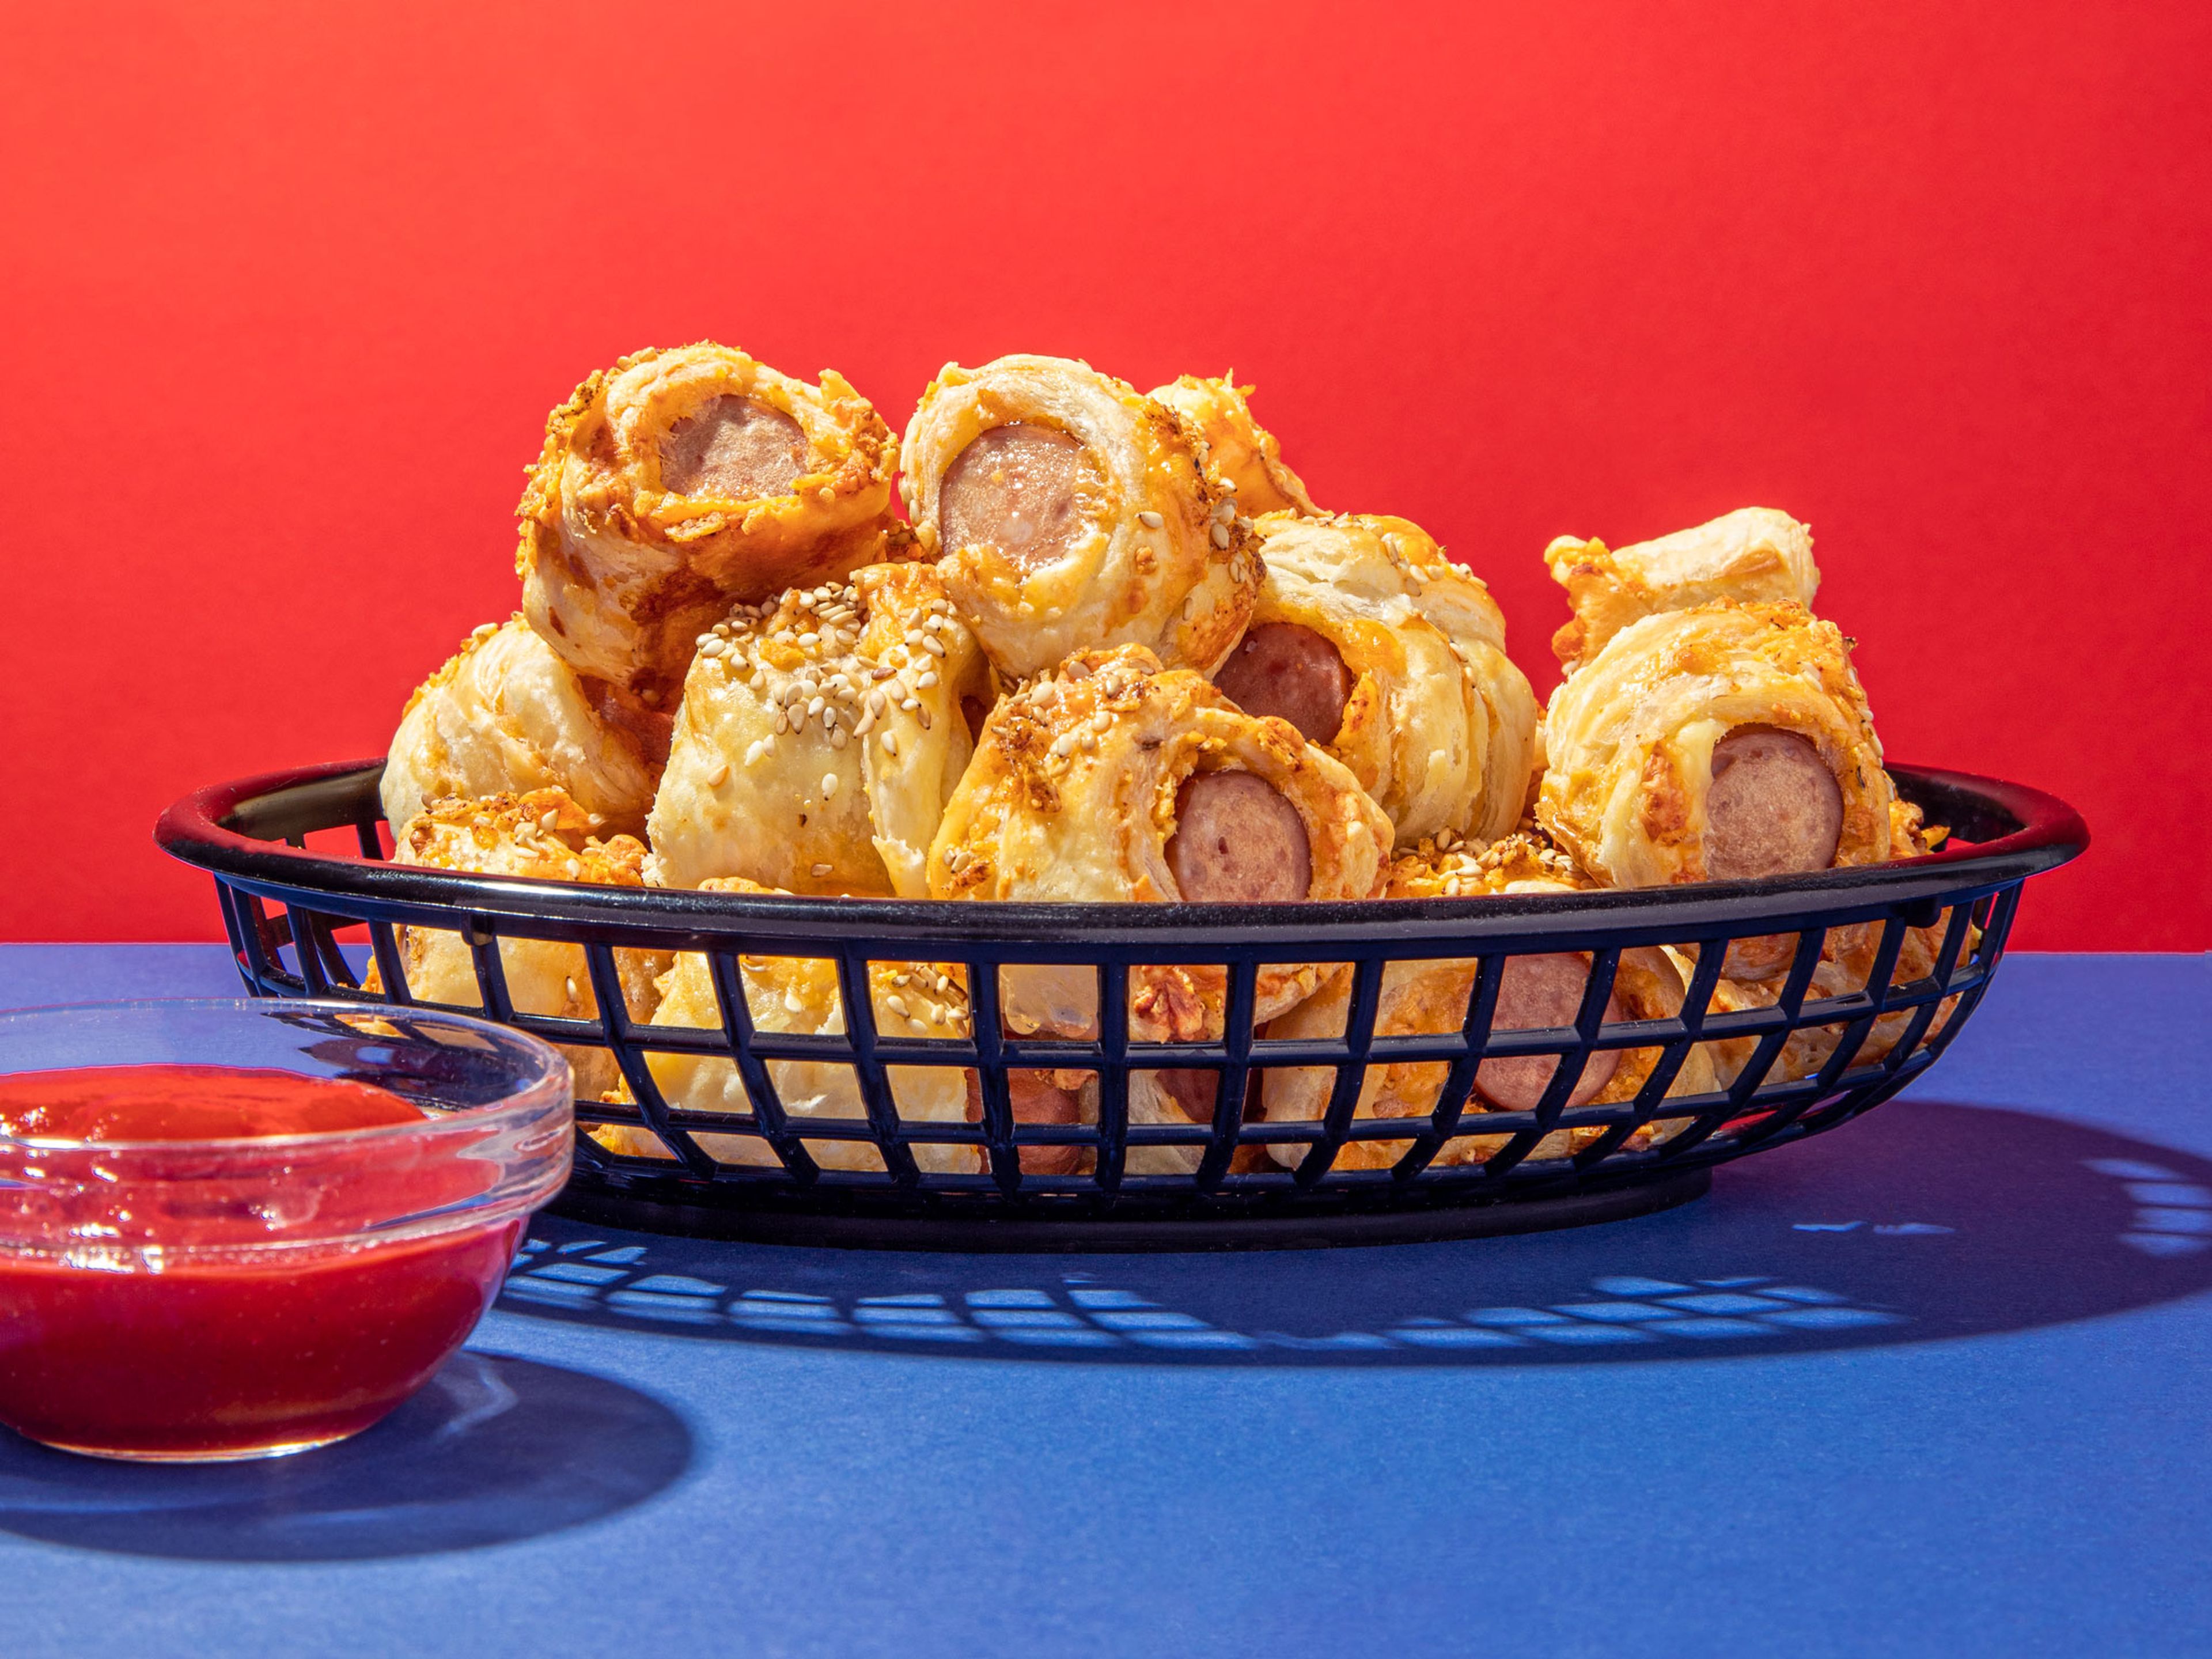 Cheesy pigs in a blanket with spicy ketchup